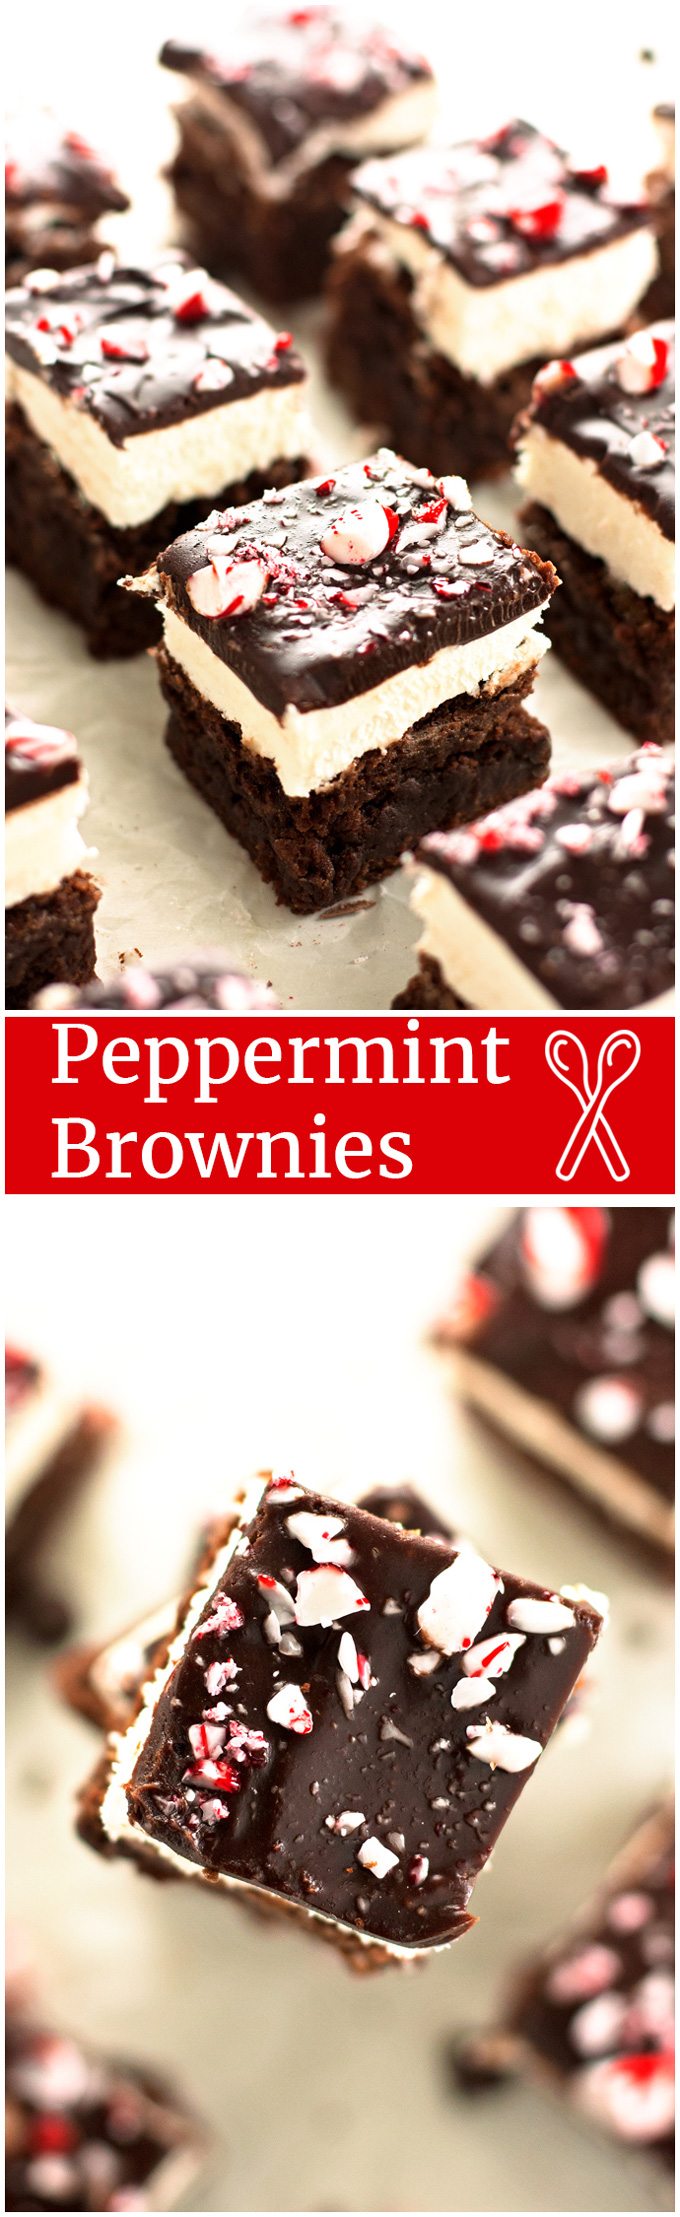 Peppermint Brownies: Celebrate the holidays with layers of fudgy peppermint brownies, creamy peppermint buttercream frosting, a rich layer of chocolate ganache, and crushed candy canes. A winning recipe for holiday cheer! - 2teaspoons.com